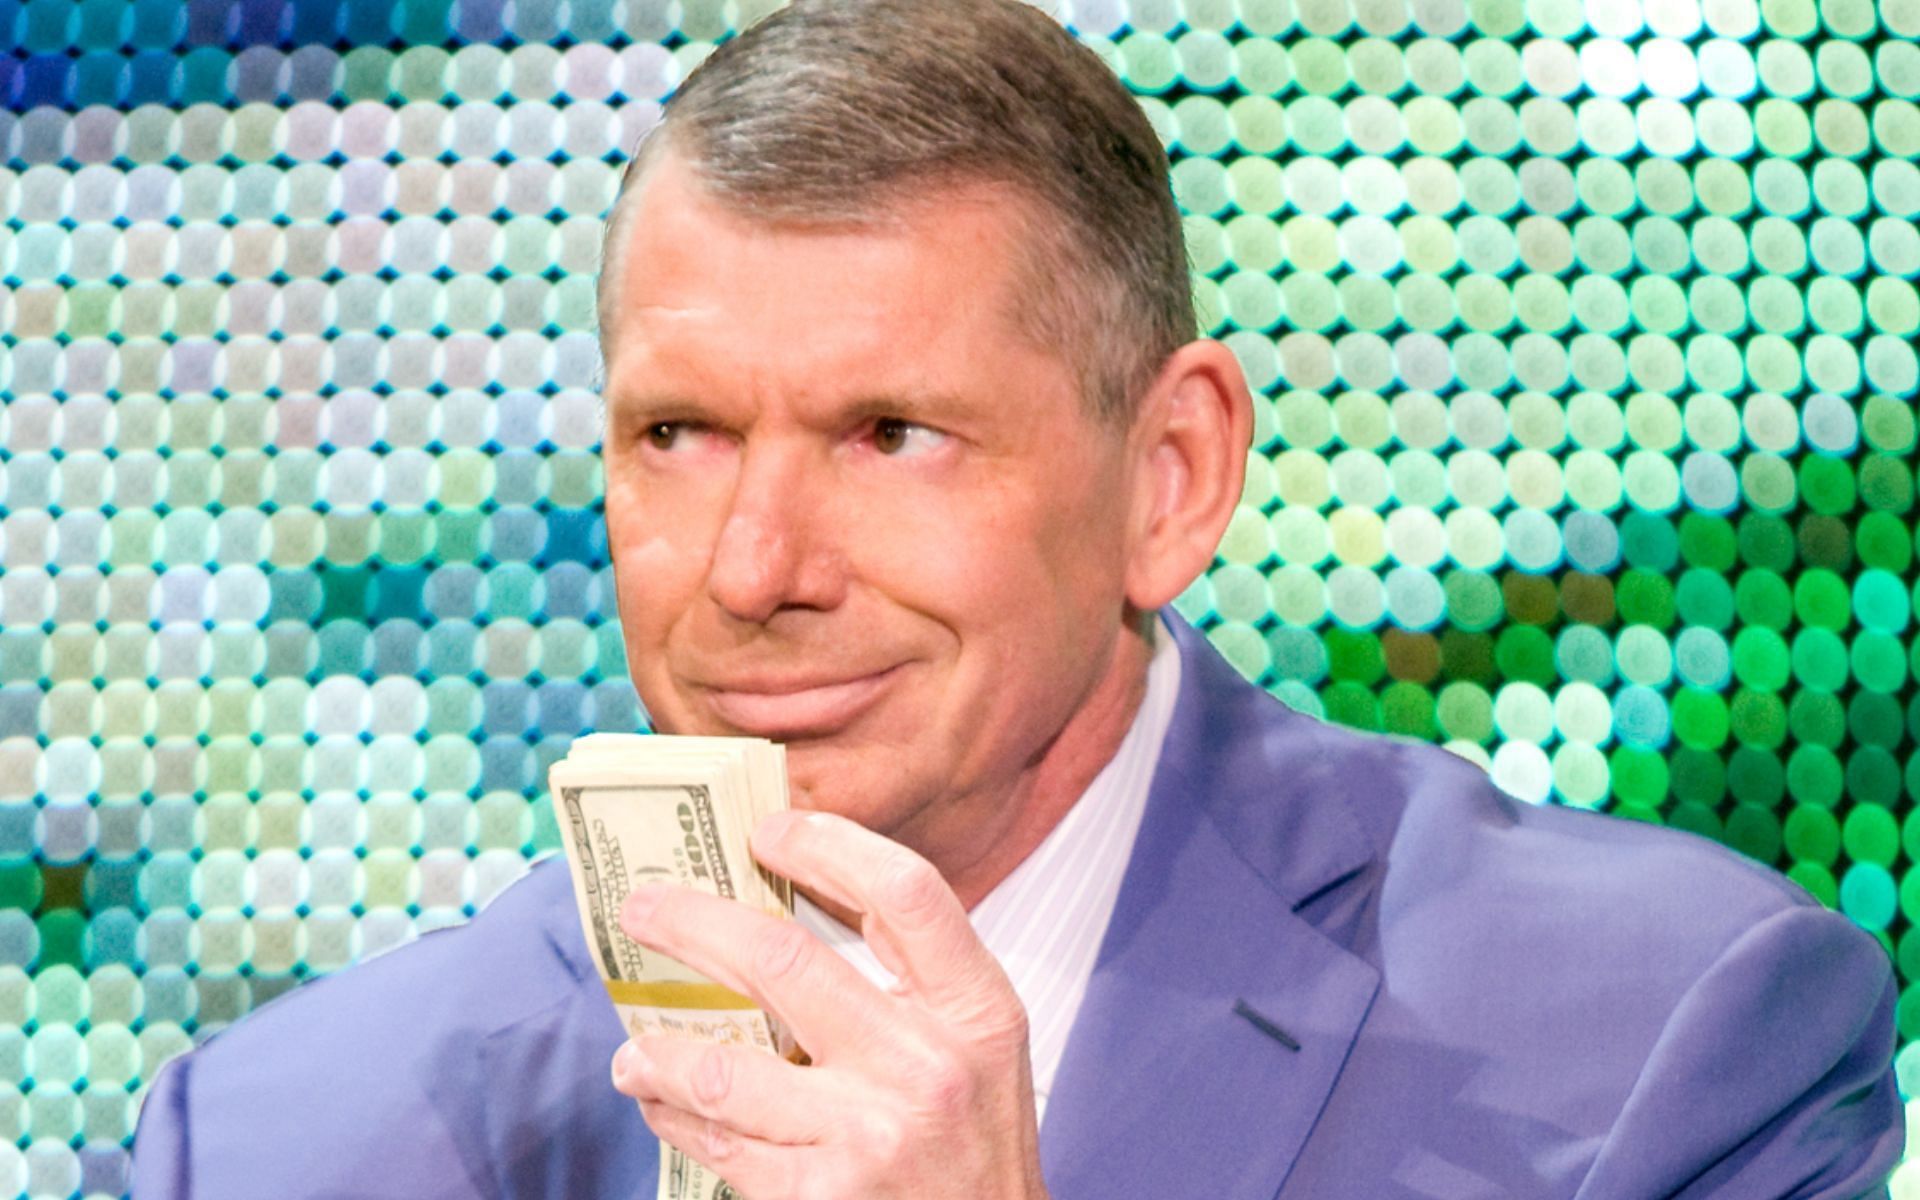 Former WWE Chairman and CEO, Vince McMahon.